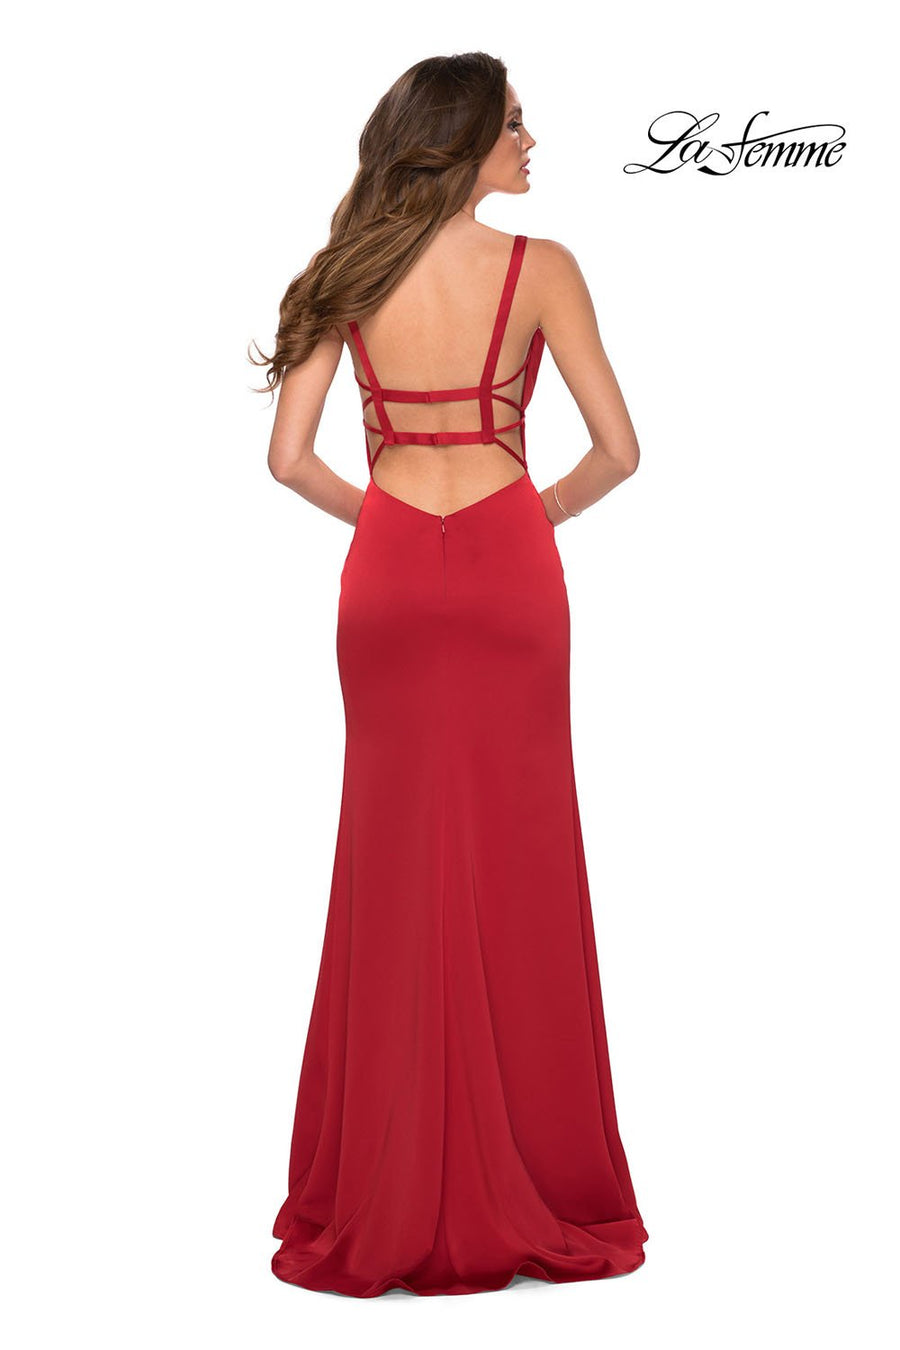 La Femme 29349 prom dress images.  La Femme 29349 is available in these colors: Red.